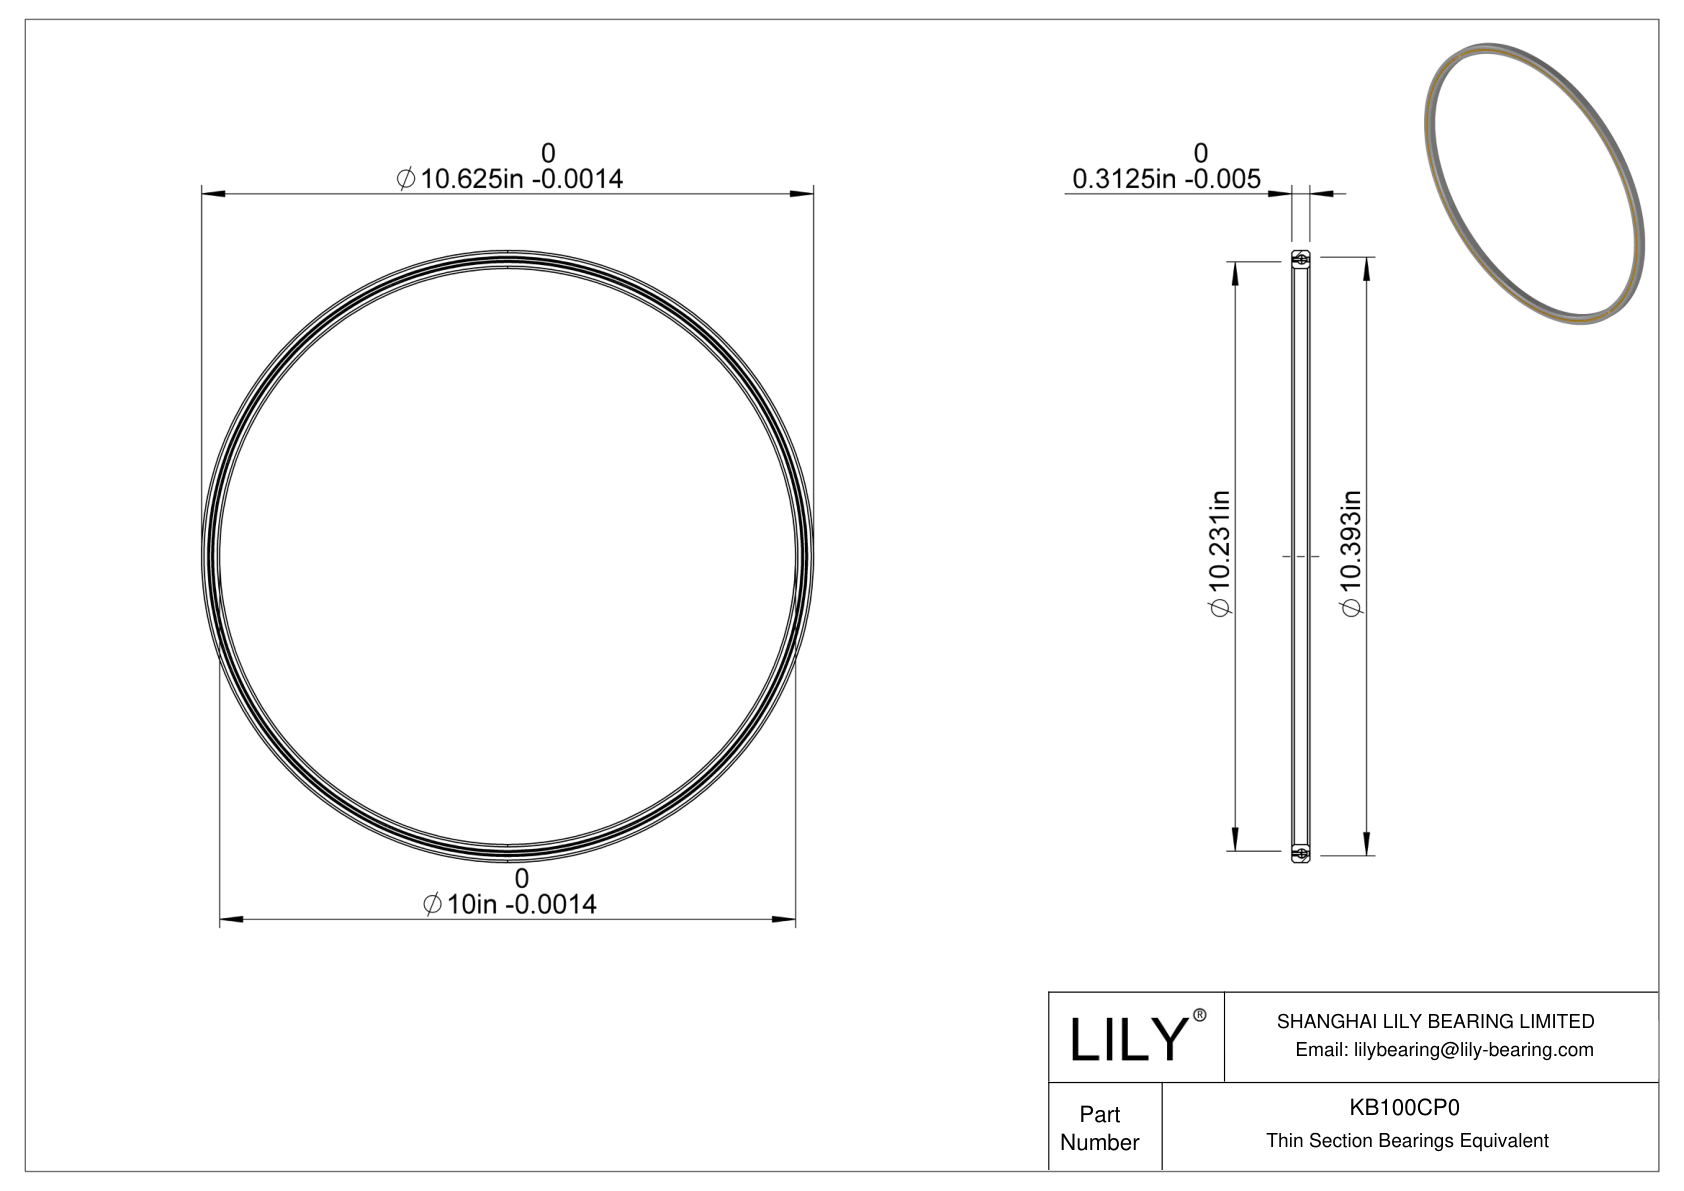 KB100CP0 Constant Section (CS) Bearings cad drawing